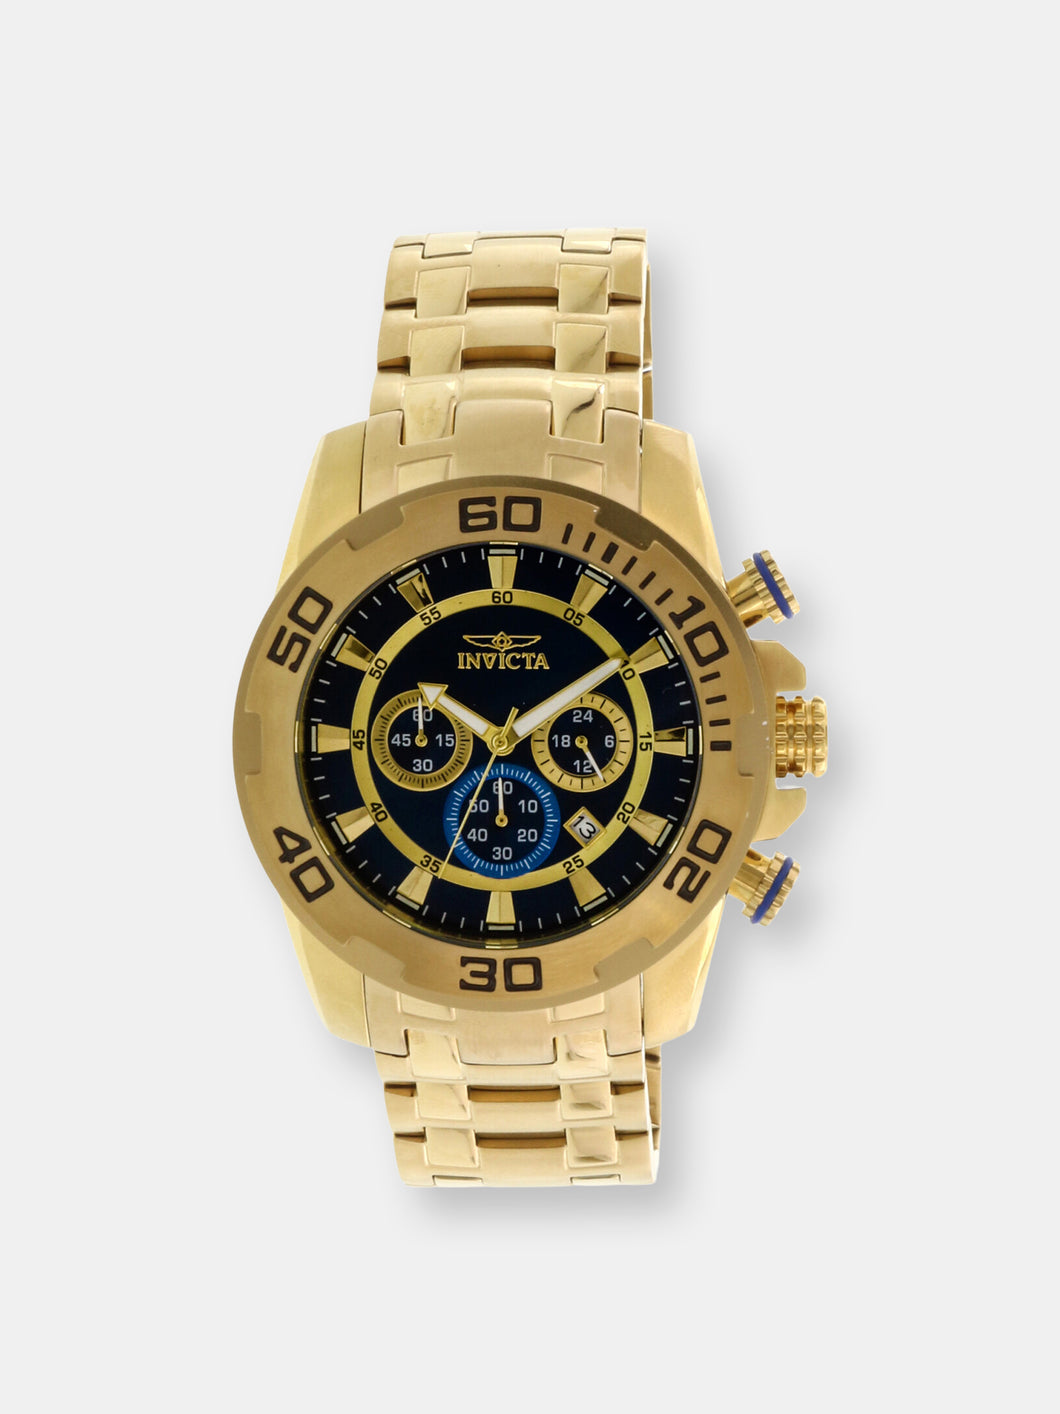 Invicta Men's Pro Diver 22321 Gold Stainless-Steel Japanese Chronograph Diving Watch